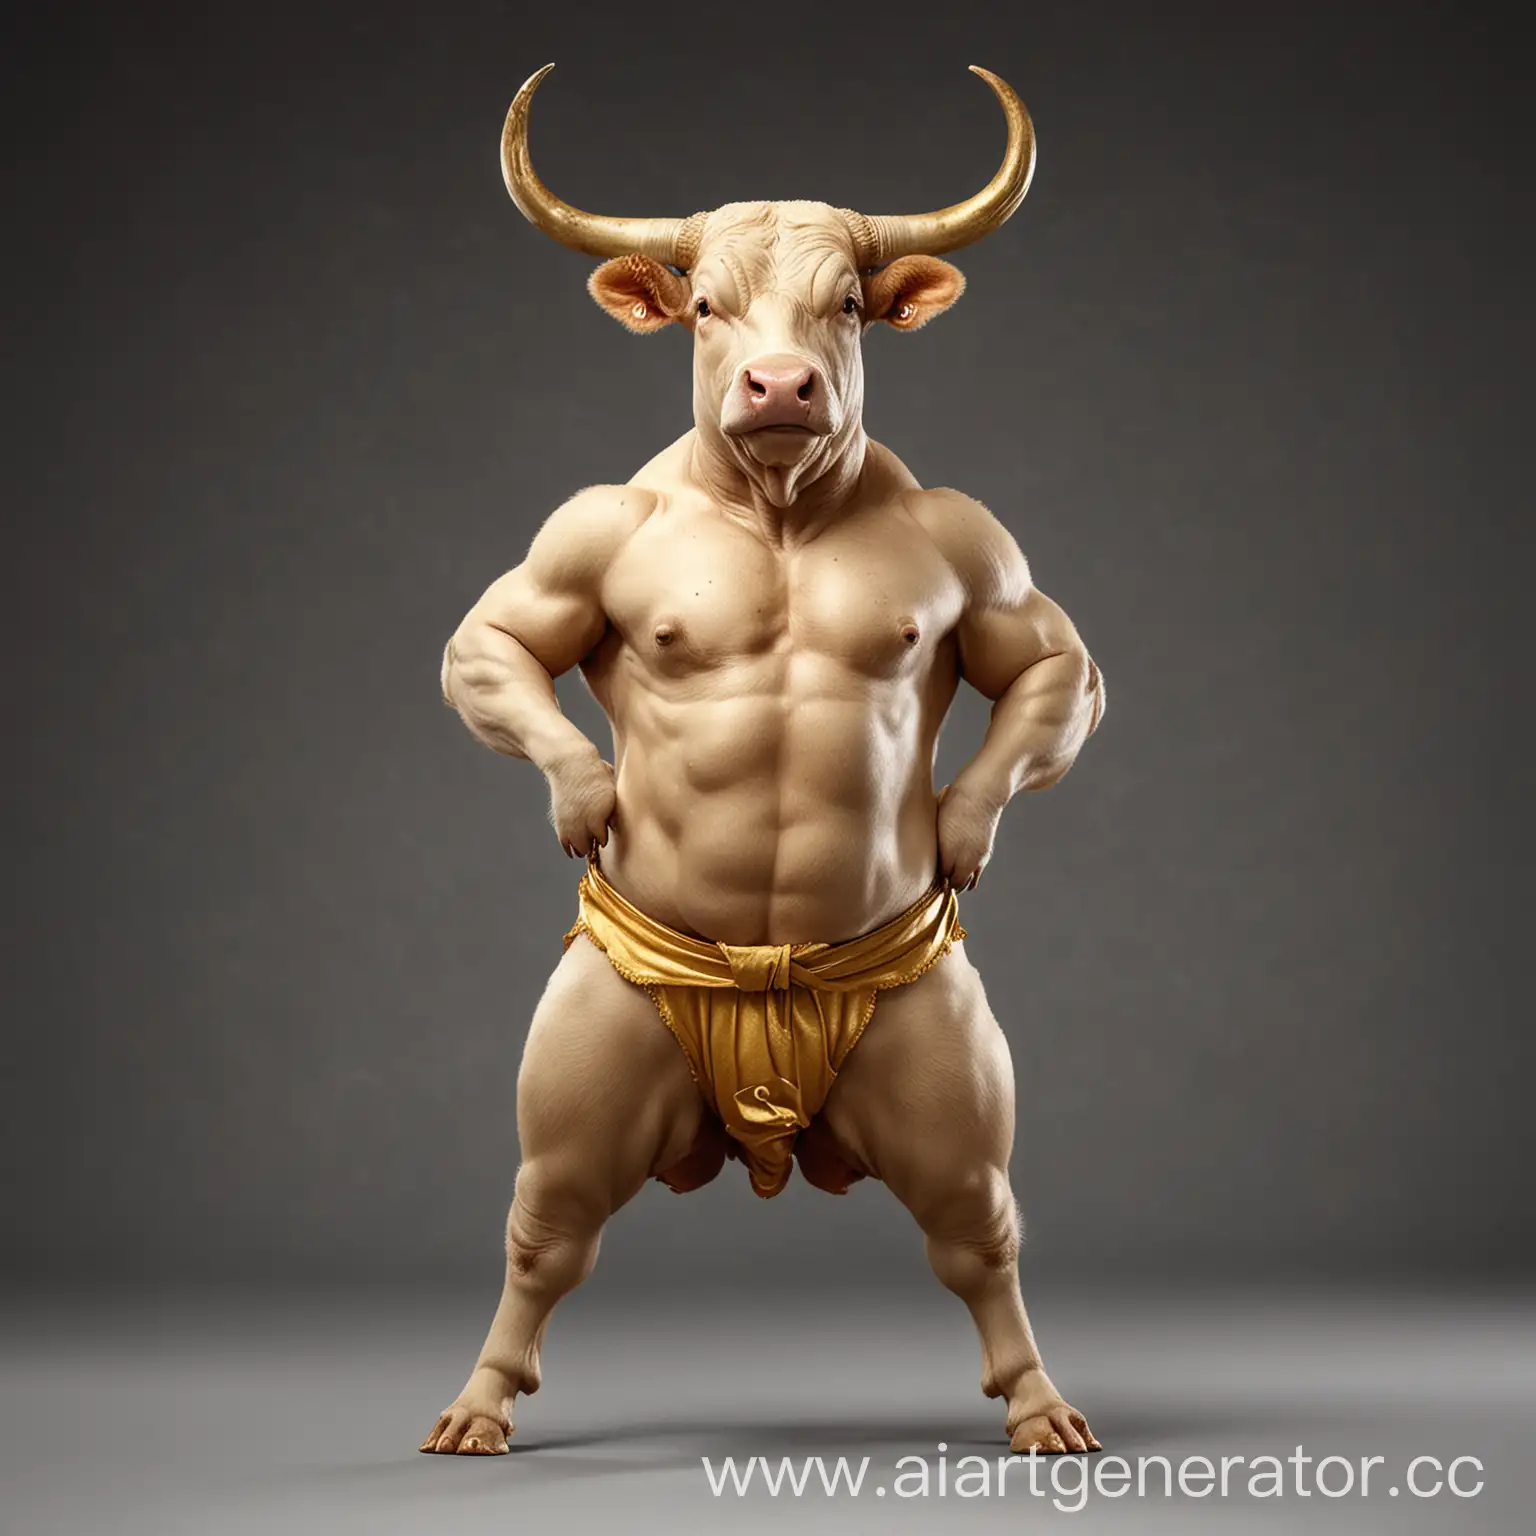 Create an image of a beautiful bull standing on its hind legs with its hands on its hips. Instead of regular eggs, it should have golden ones.